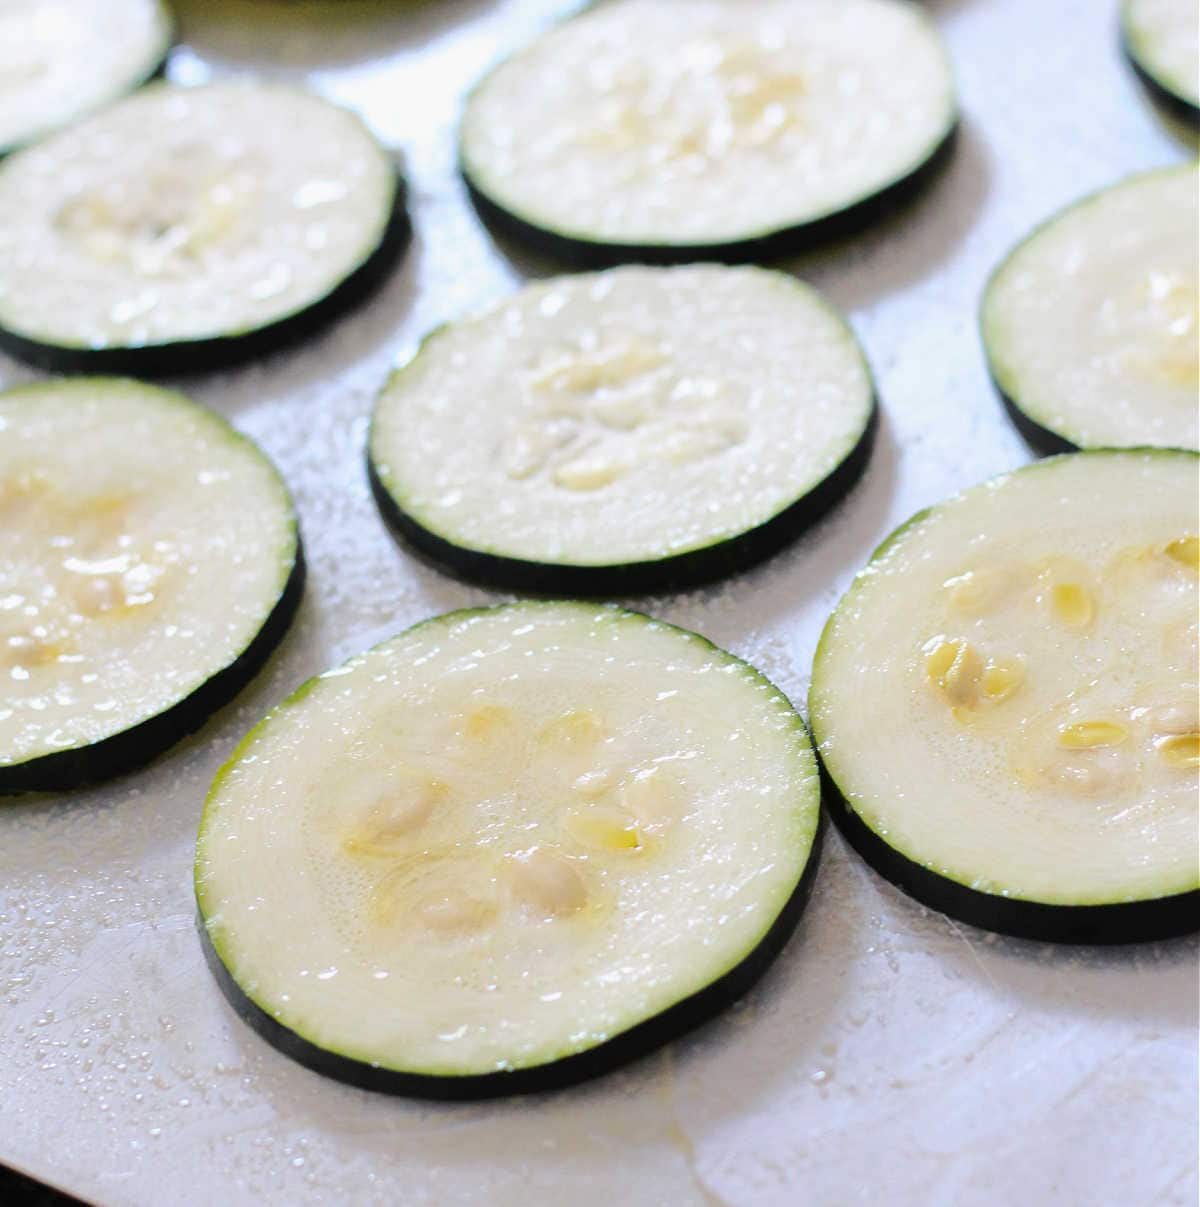 zucchini squash resting with salt drizzle to remove excess water